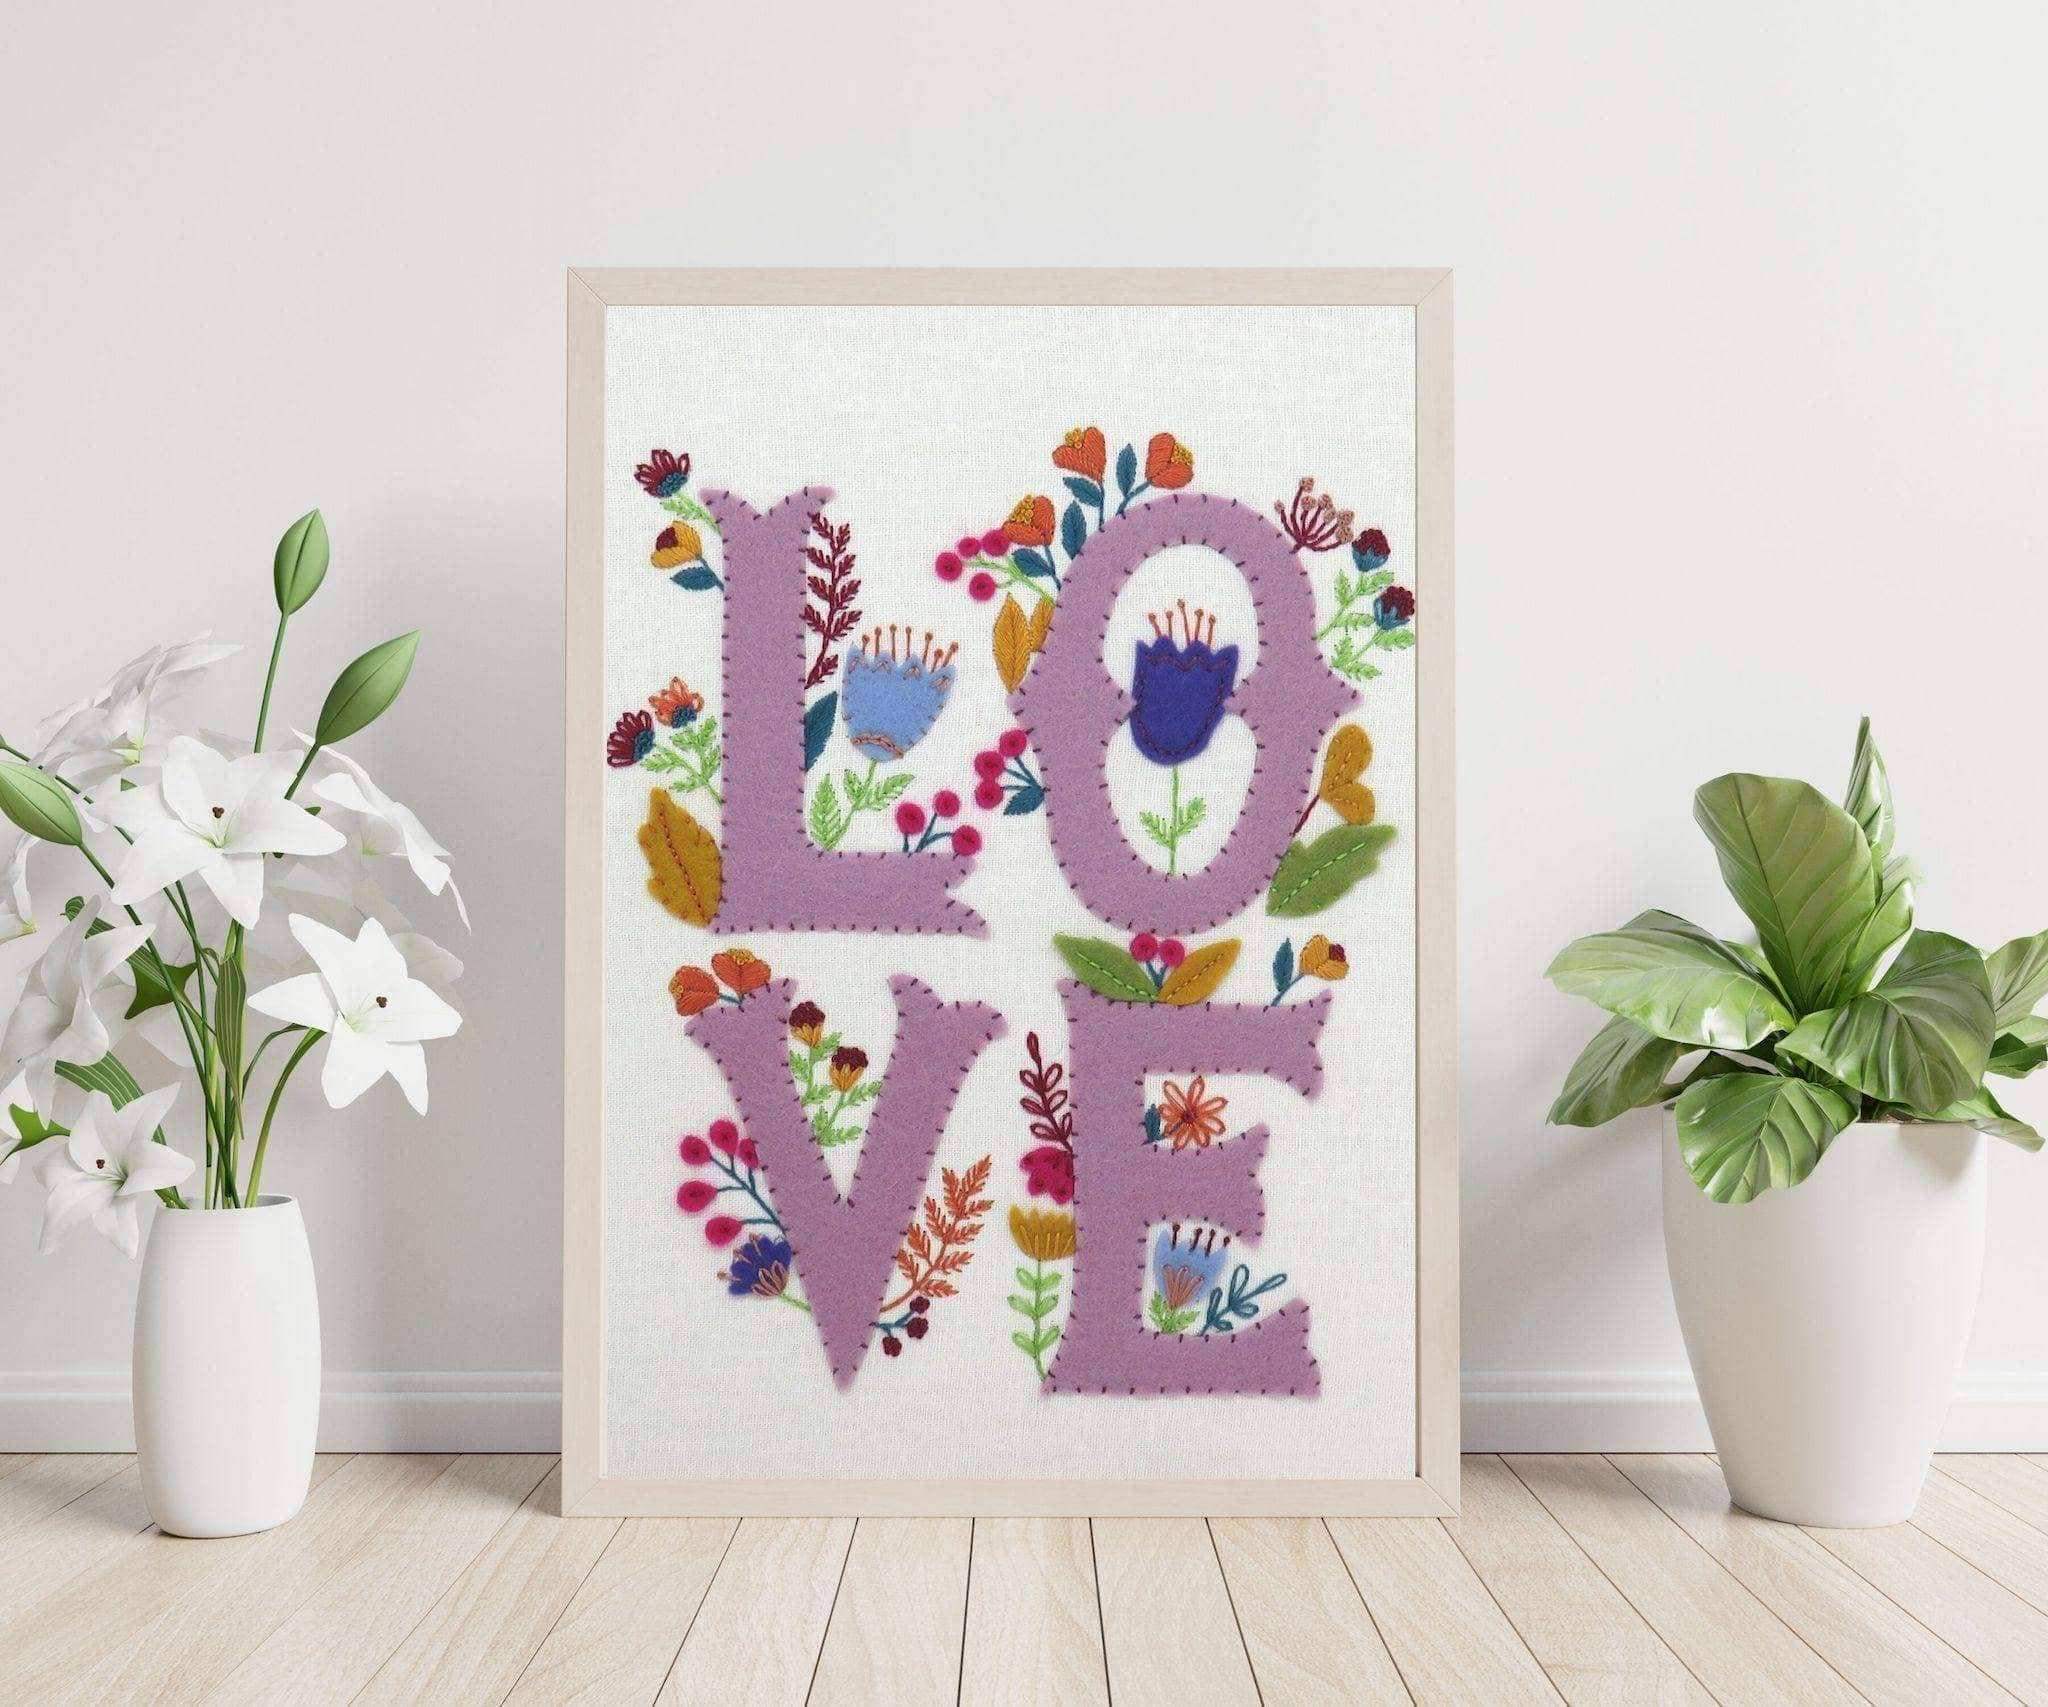 Folk Floral 'LOVE' Pattern , PDF Download , StitchDoodles , embroidery hoop kit, embroidery kits for adults, embroidery kits for beginners, hand embroidery, modern embroidery kits, PDF pattern, unique embroidery kits , StitchDoodles , shop.stitchdoodles.com